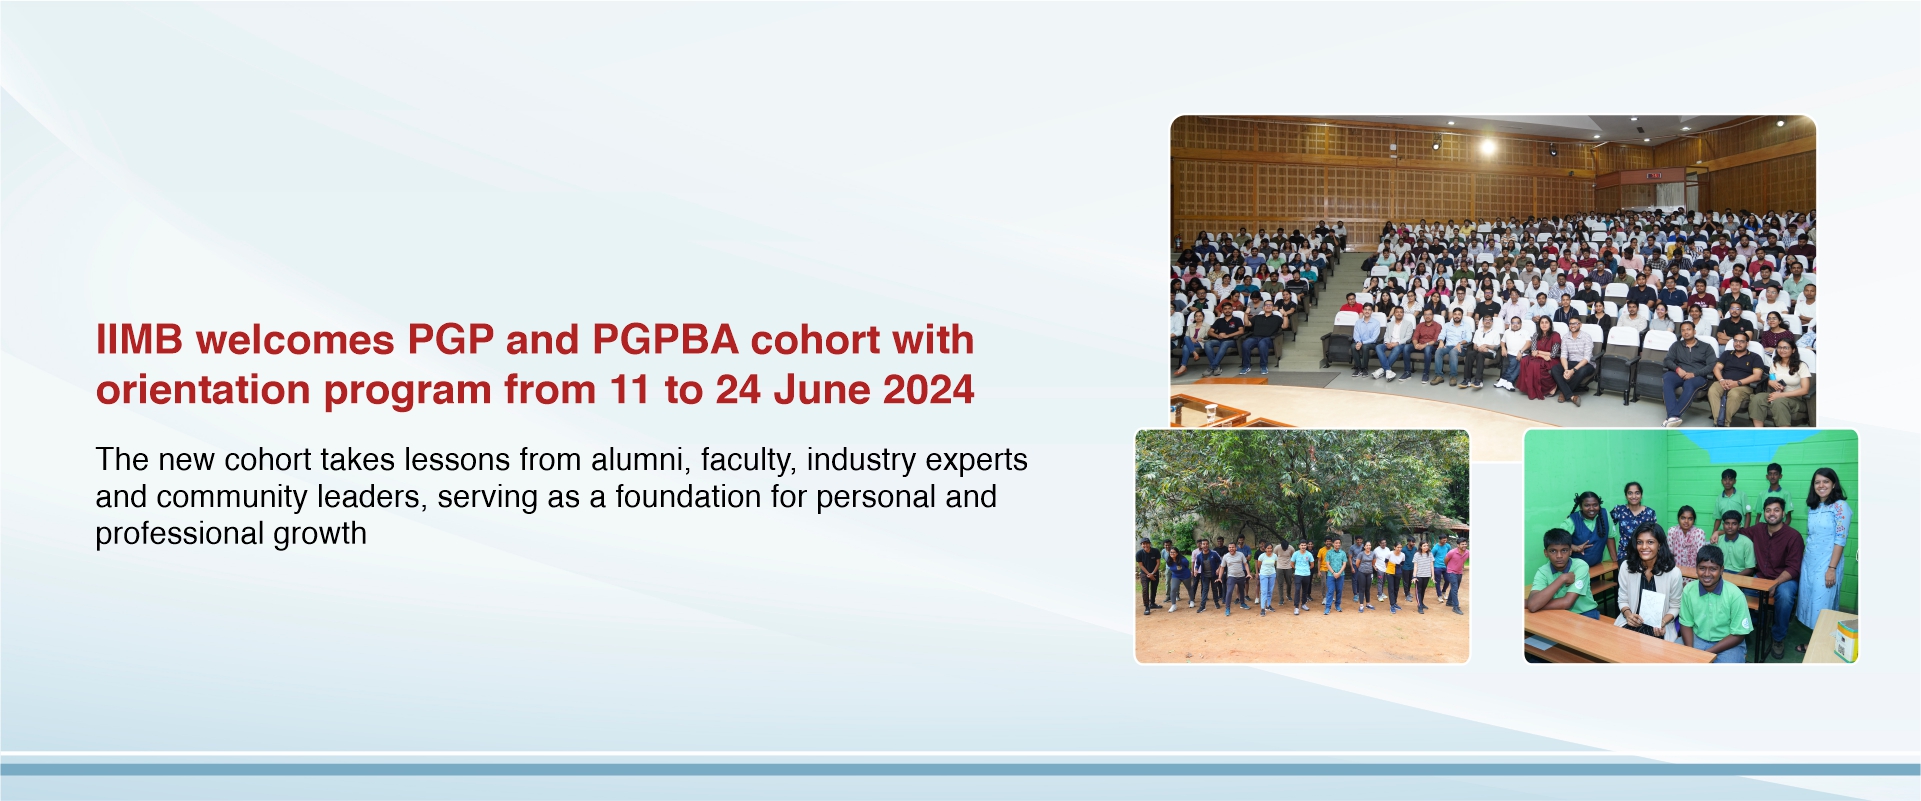 IIMB welcomes PGP and PGPBA cohort with orientation program from 11 to 24 June 2024 